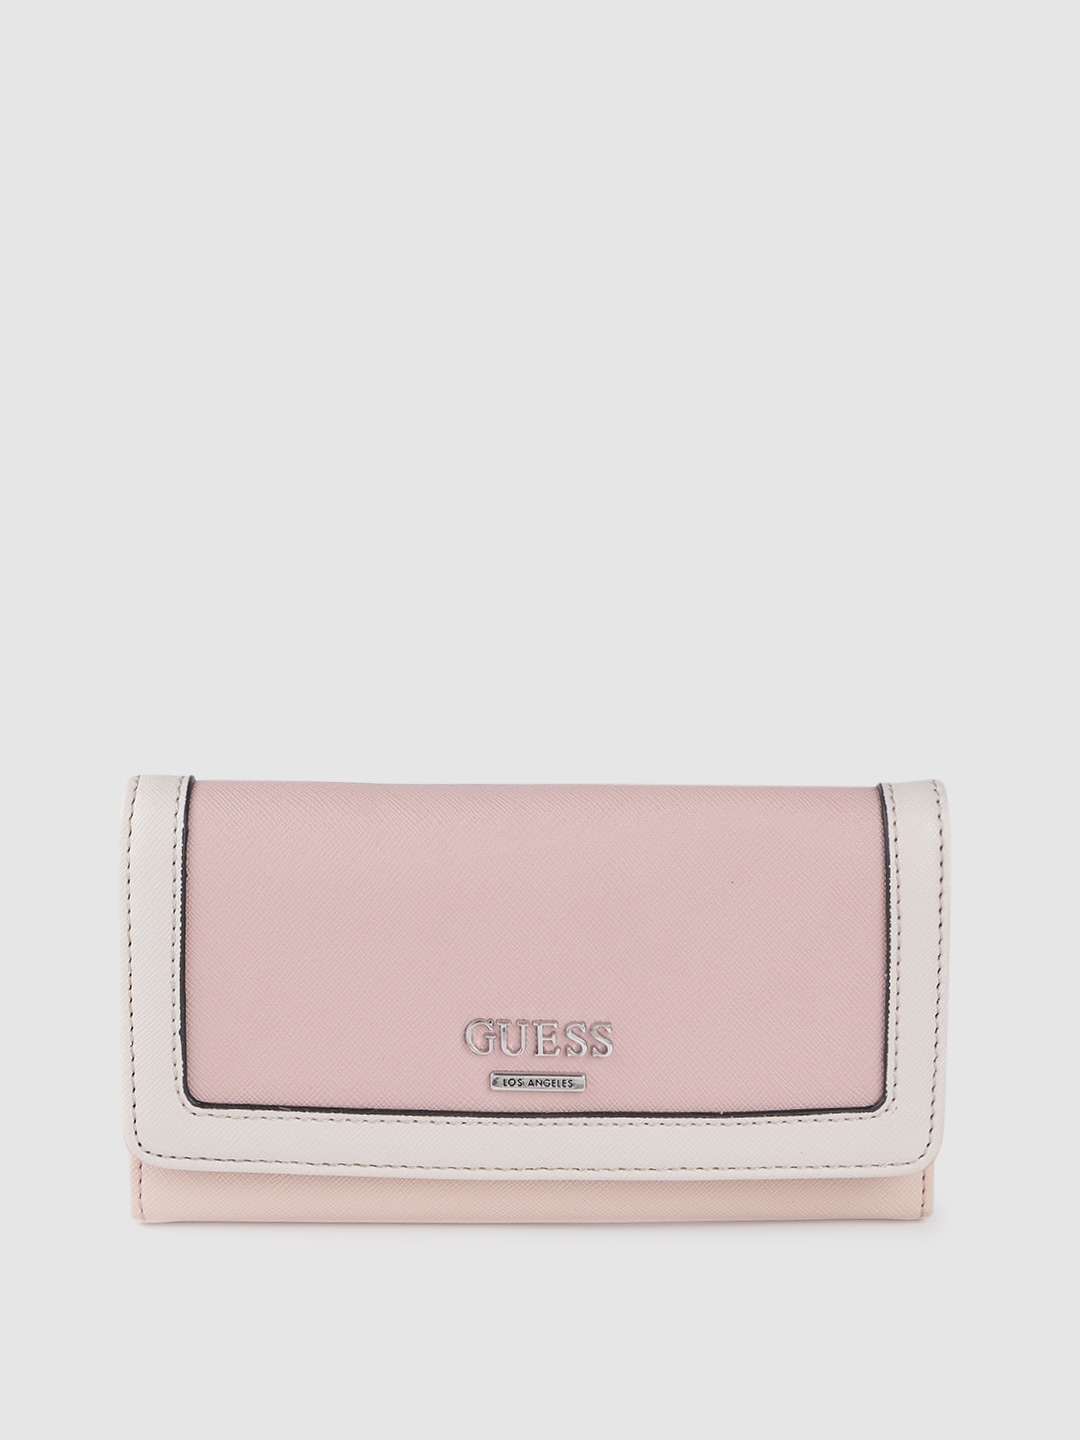 GUESS Women Dusty Pink & Off-White Saffiano Textured Three Fold Wallet Price in India